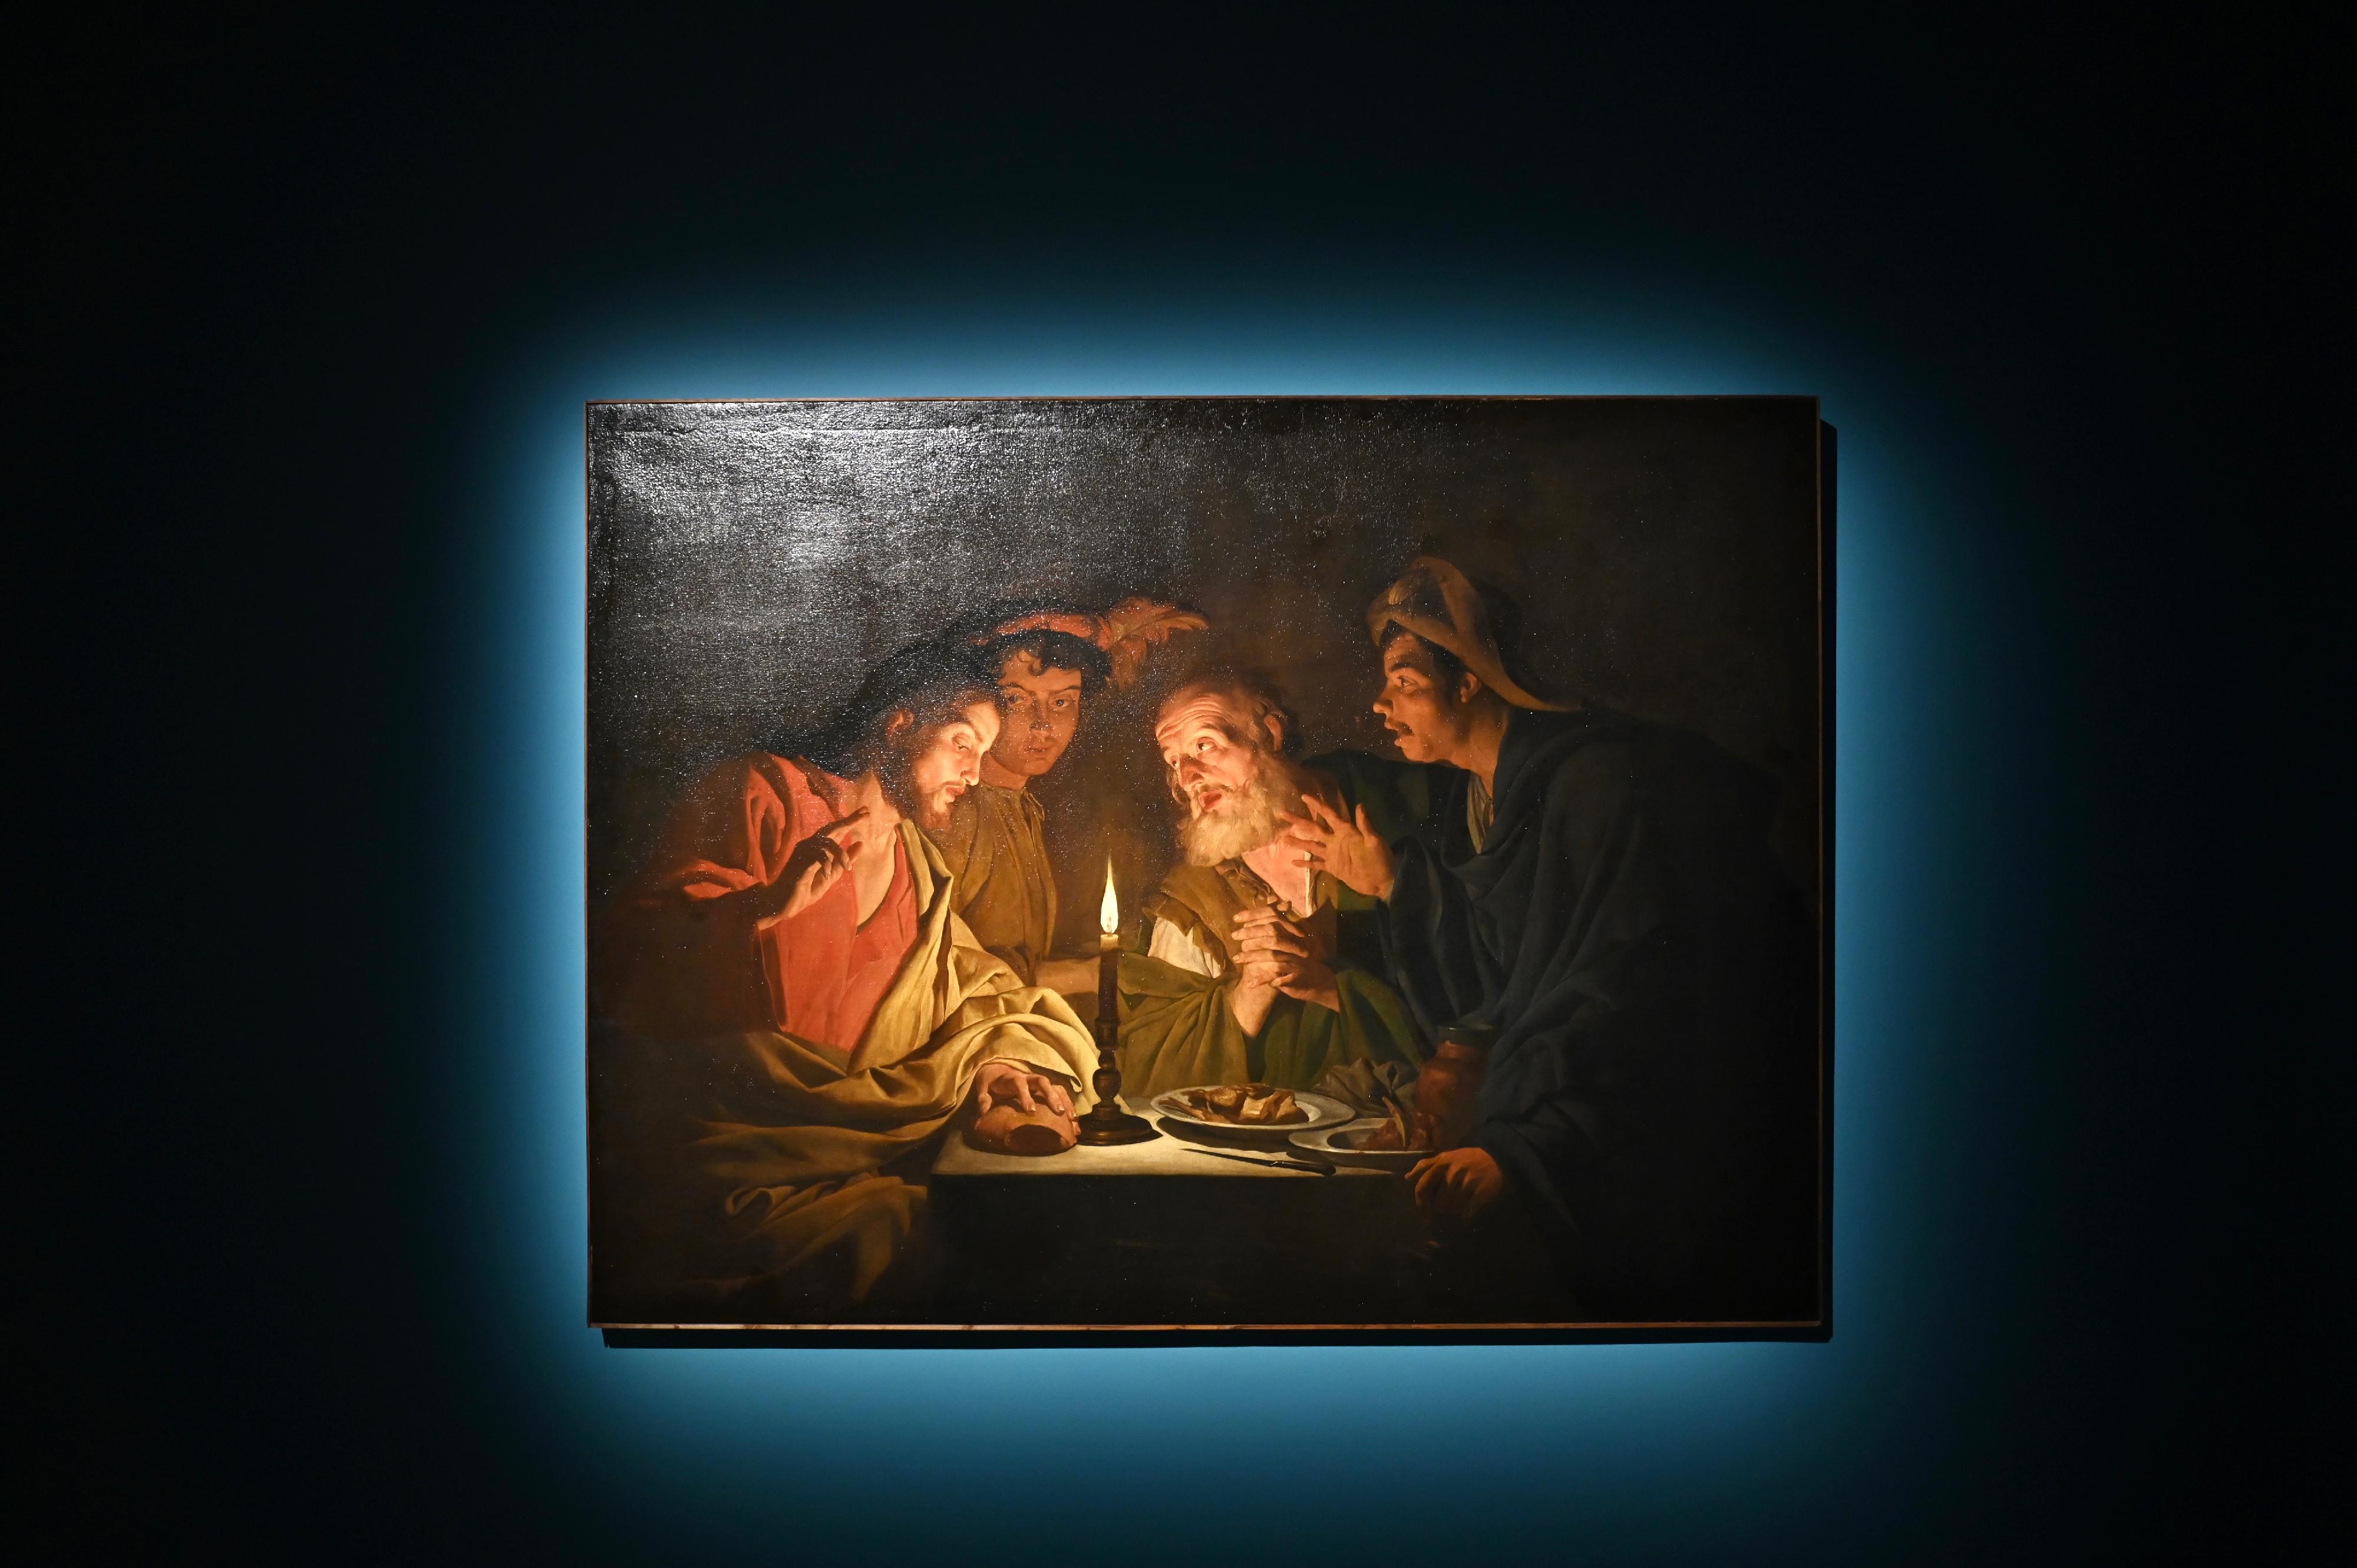 "The Hong Kong Jockey Club Series: The Road to the Baroque - Masterpieces from the Capodimonte Museum" exhibition will be held from tomorrow (July 15) at the Hong Kong Museum of Art. Picture shows Mattias Stomer's "Supper at Emmaus".